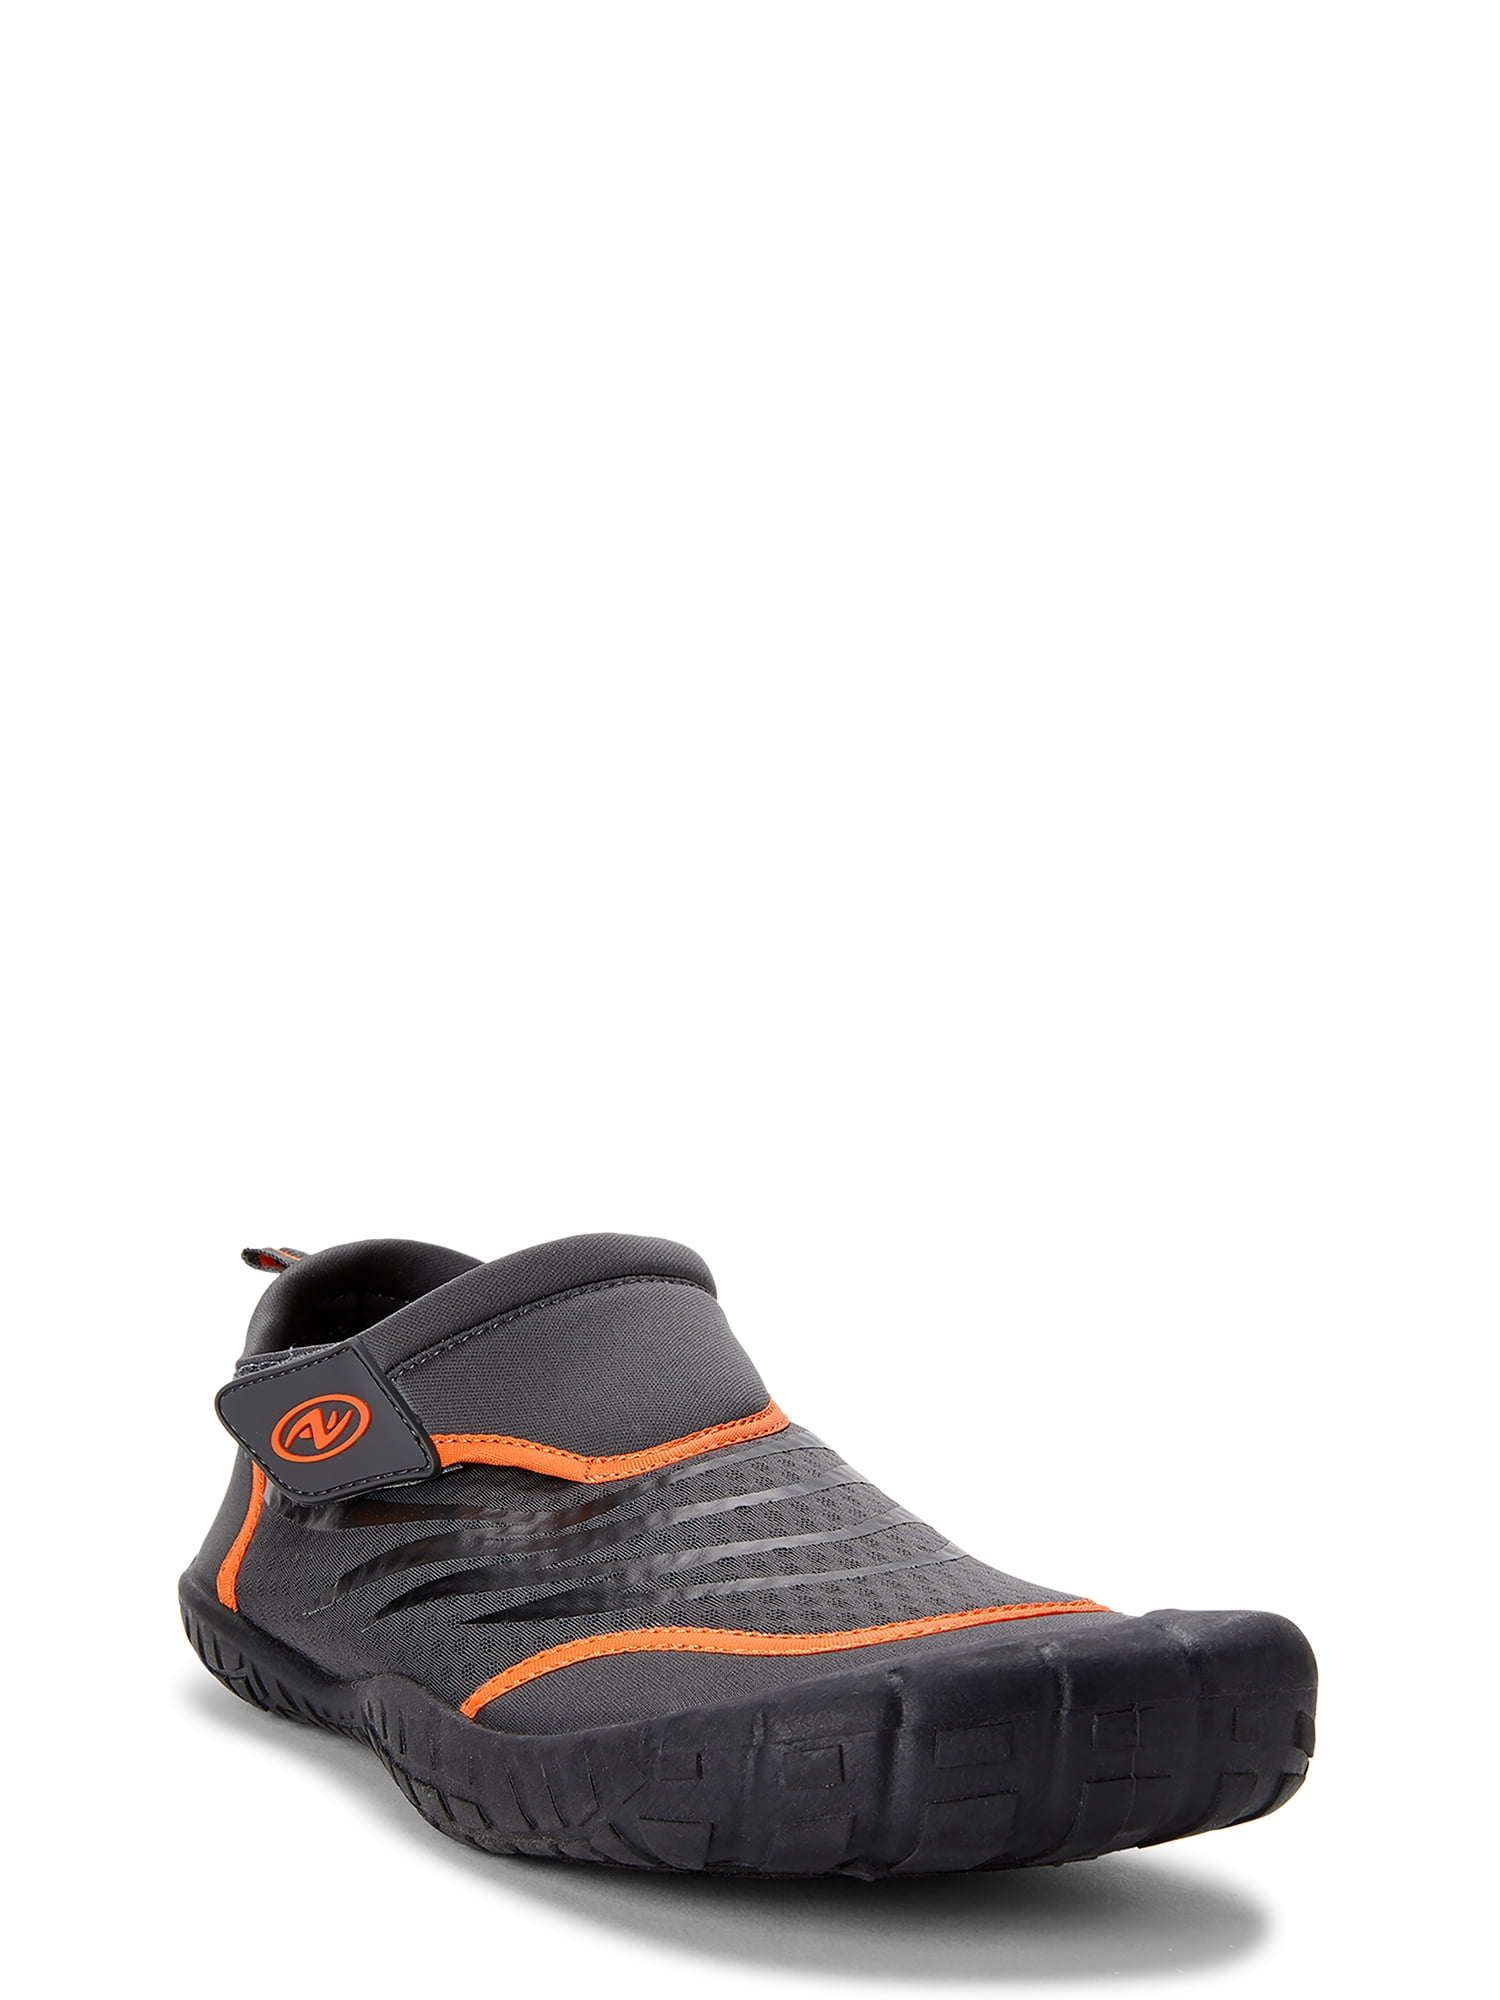 walmart athletic works water shoes